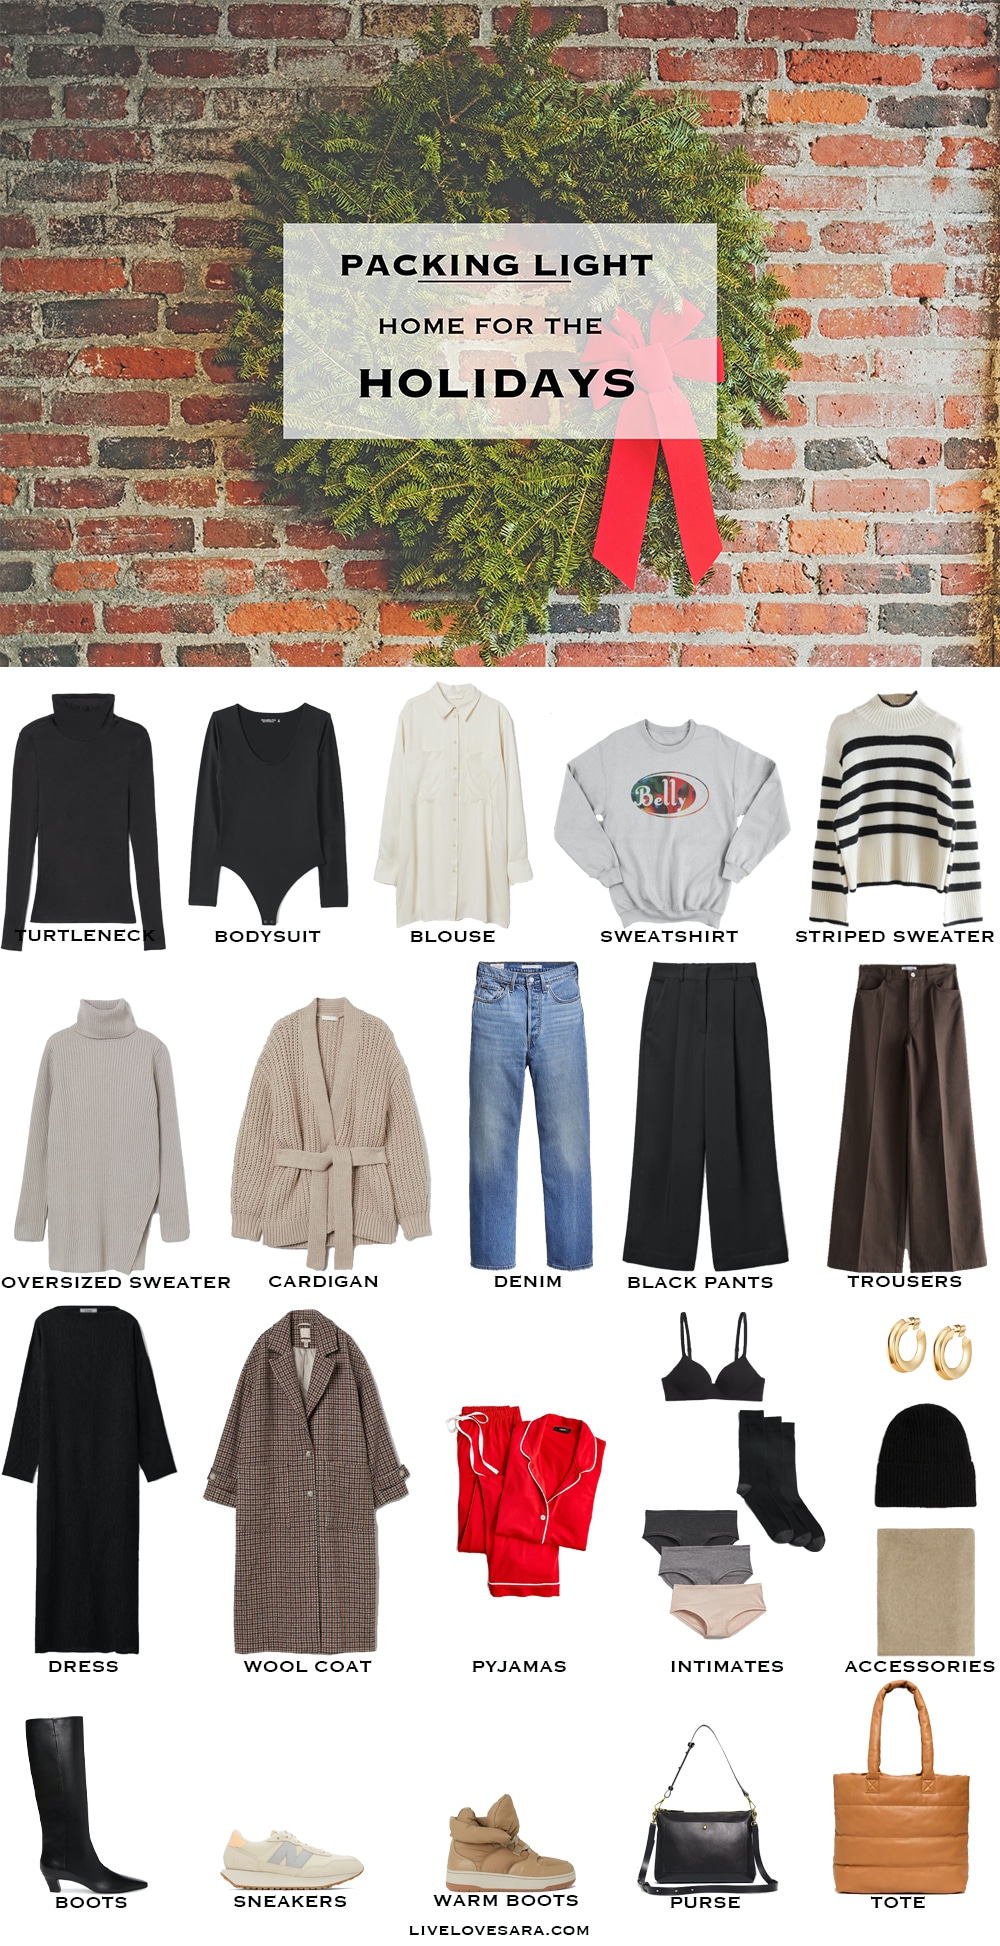 At picture of a brick wall with a holiday wreath in the center and below laid out in rows are the clothes to pack for the holidays.